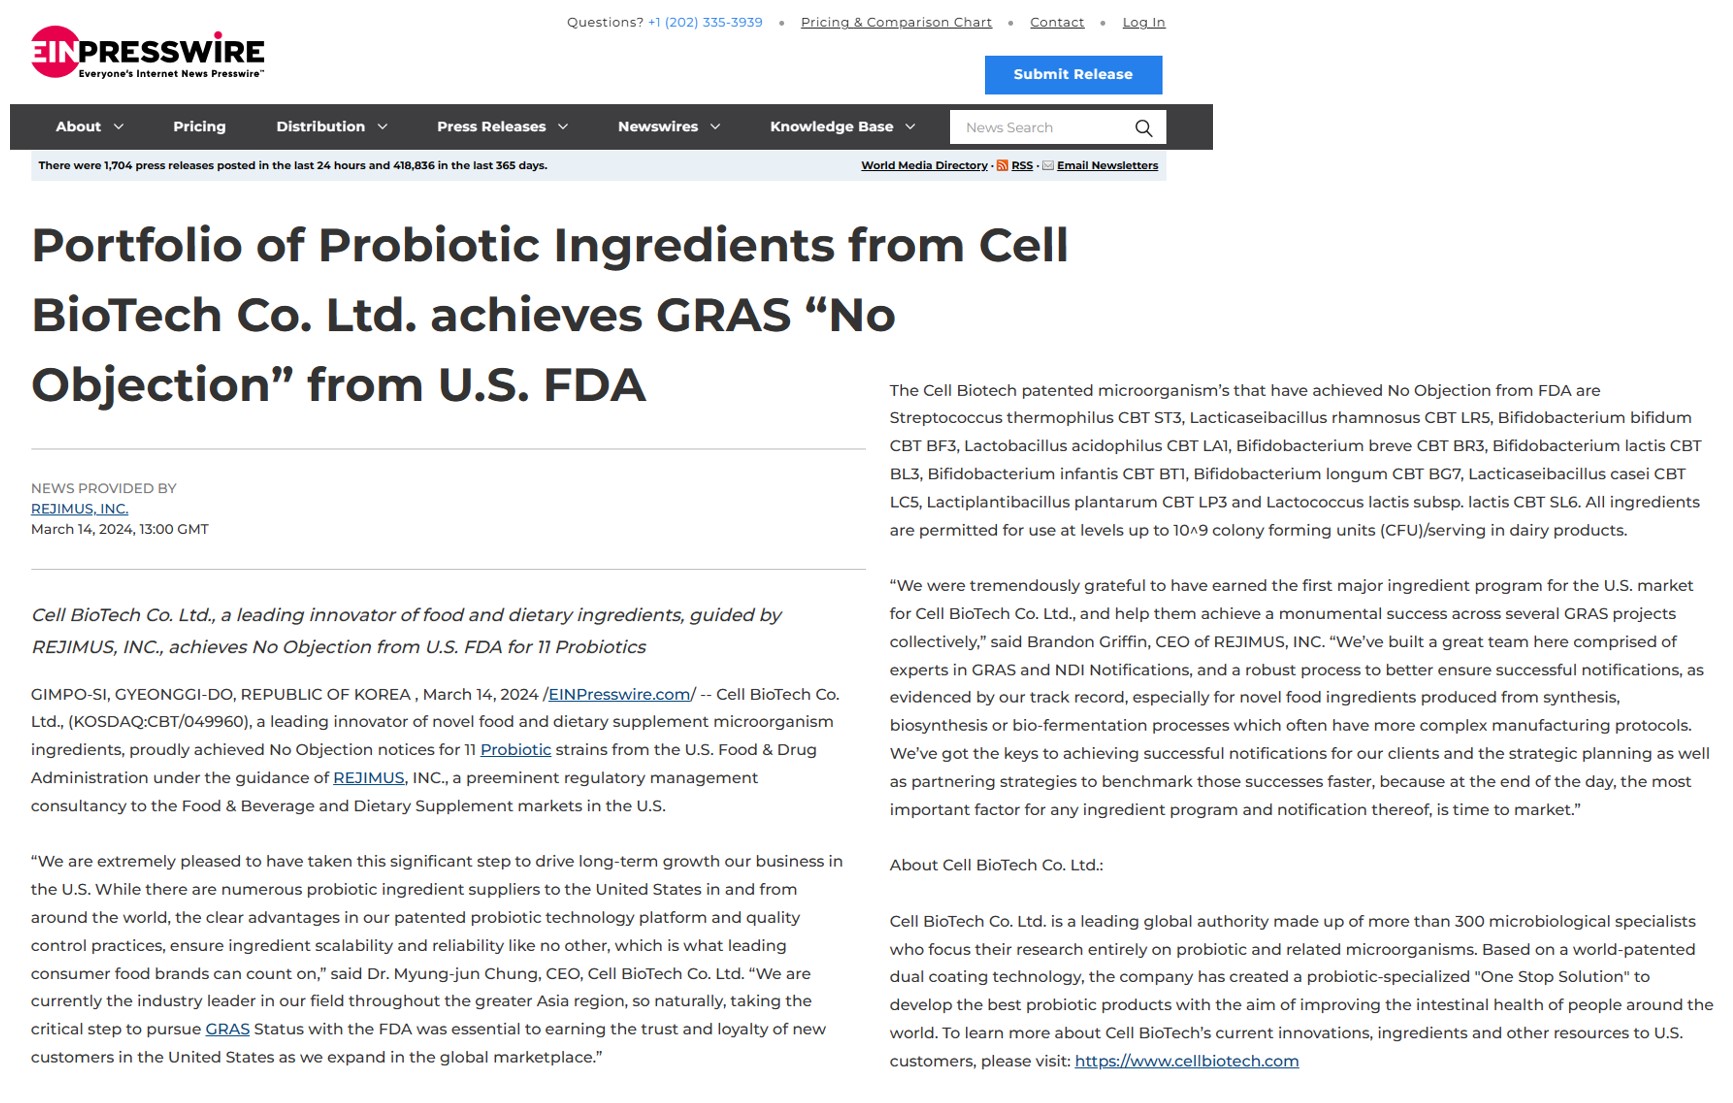 Portfolio of Probiotic Ingredients from Cell BioTech Co. Ltd. achieves GRAS “No Objection” from U.S. FDA